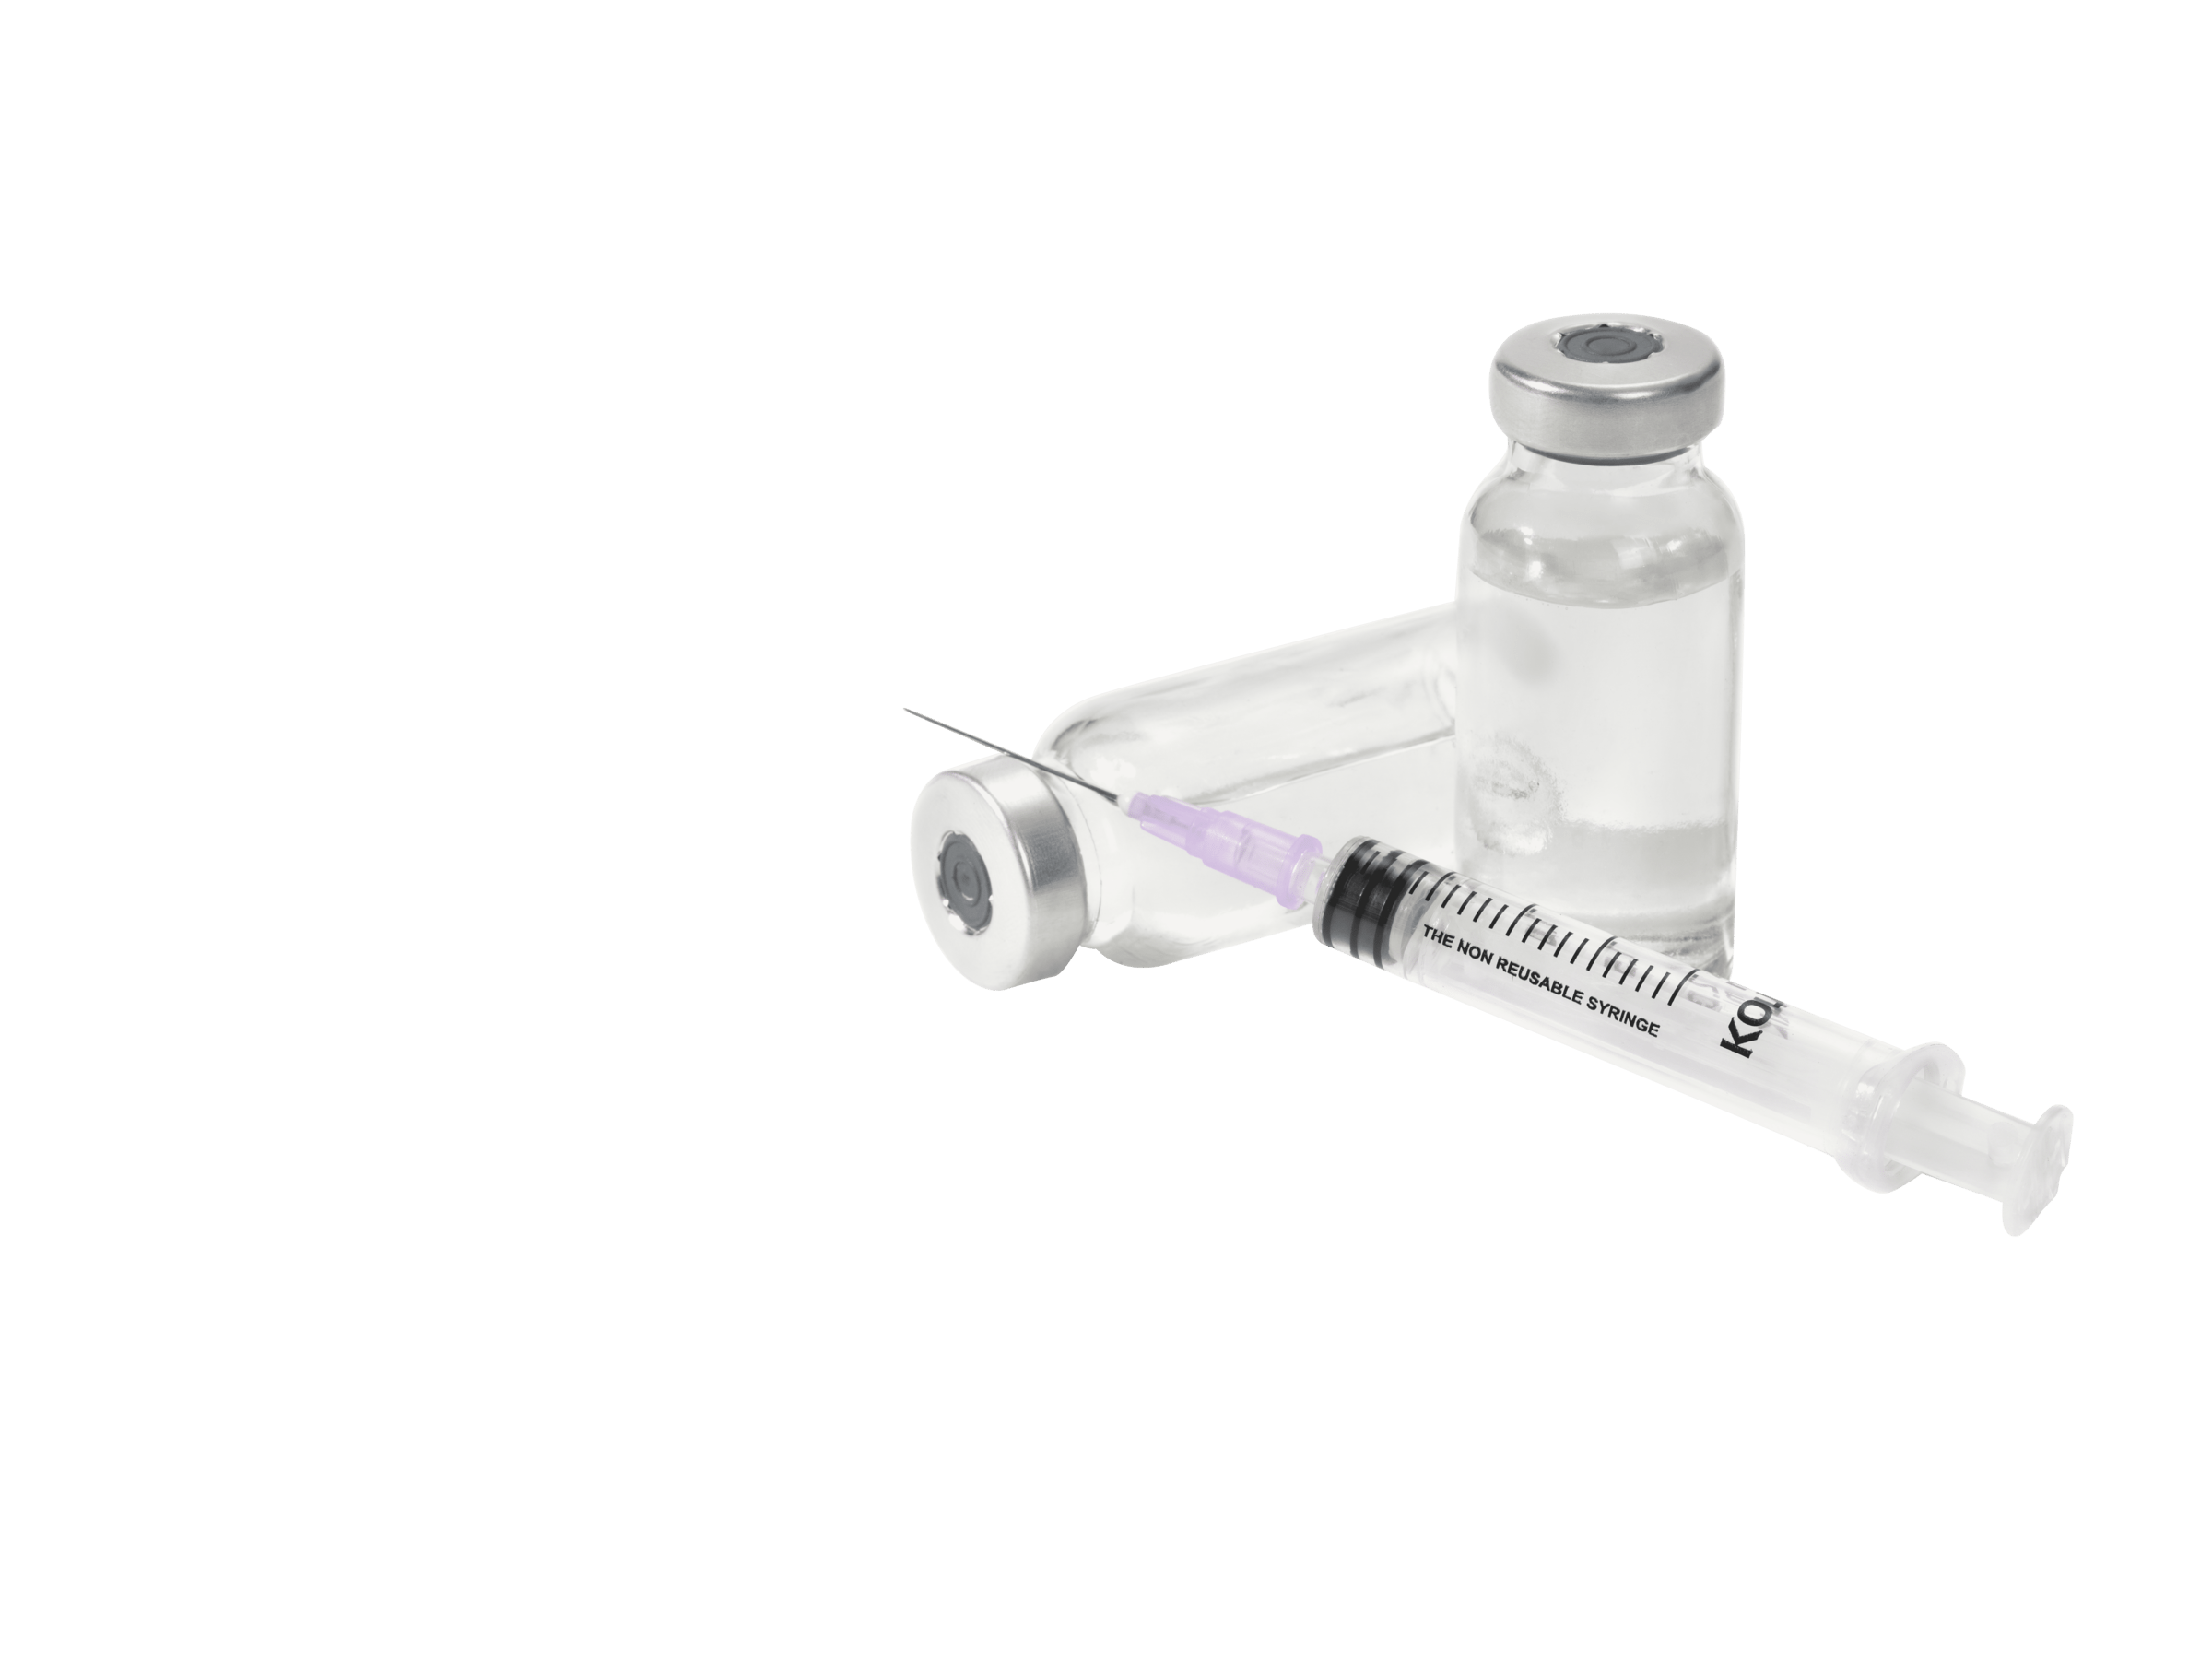 Safe and Sterile Kojak Selinge Auto-Disable Syringes for Medical picture